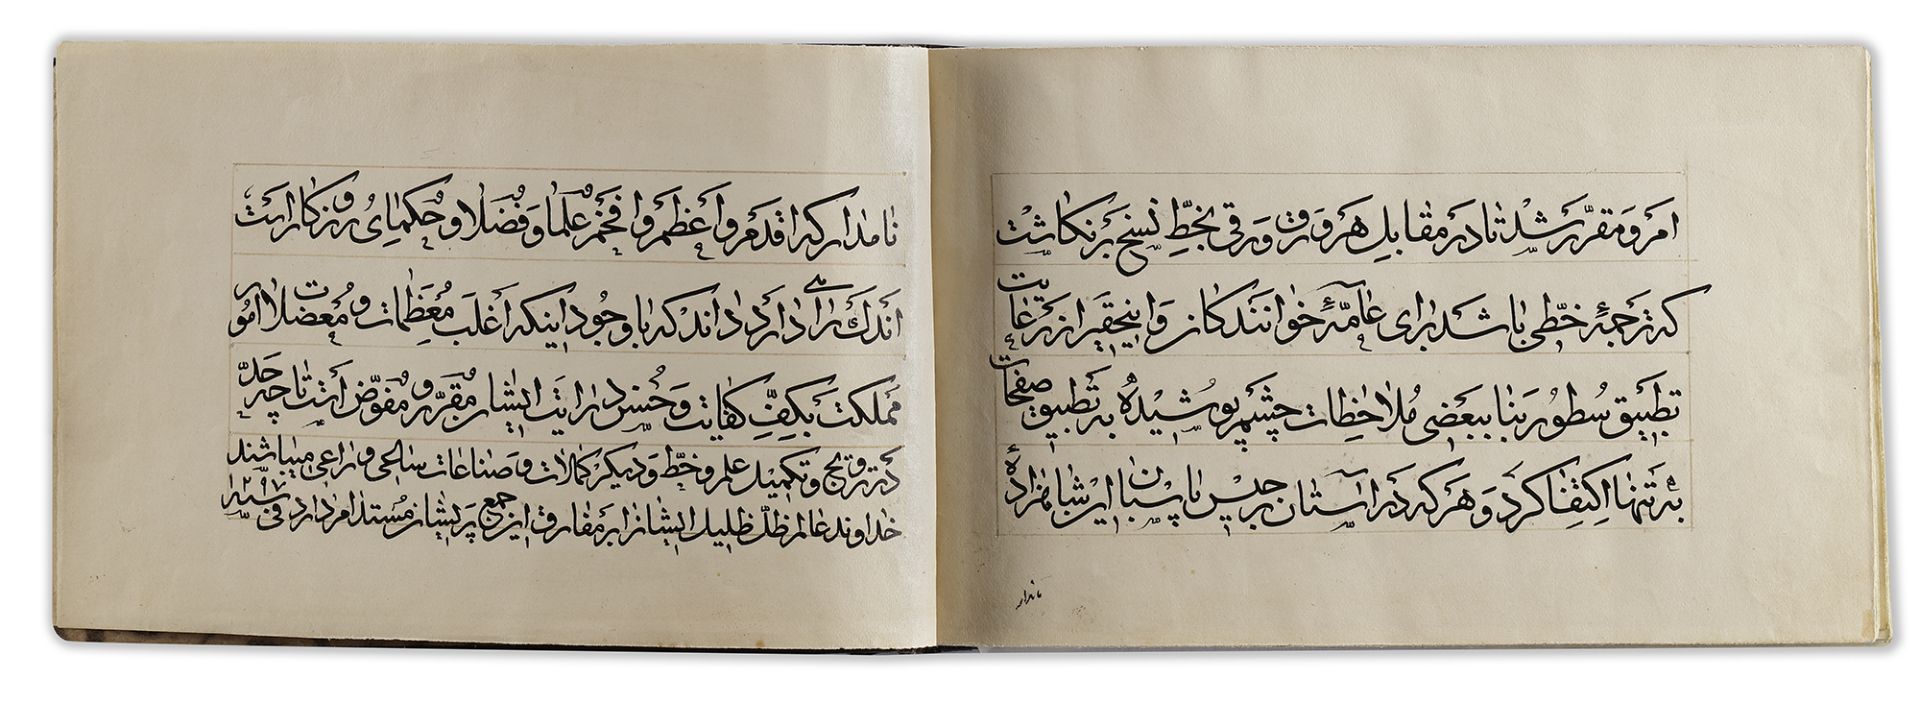 A KUFIC QURAN SECTION NEAR EAST OR NORTH AFRICA, 9TH CENTURY - Image 7 of 9